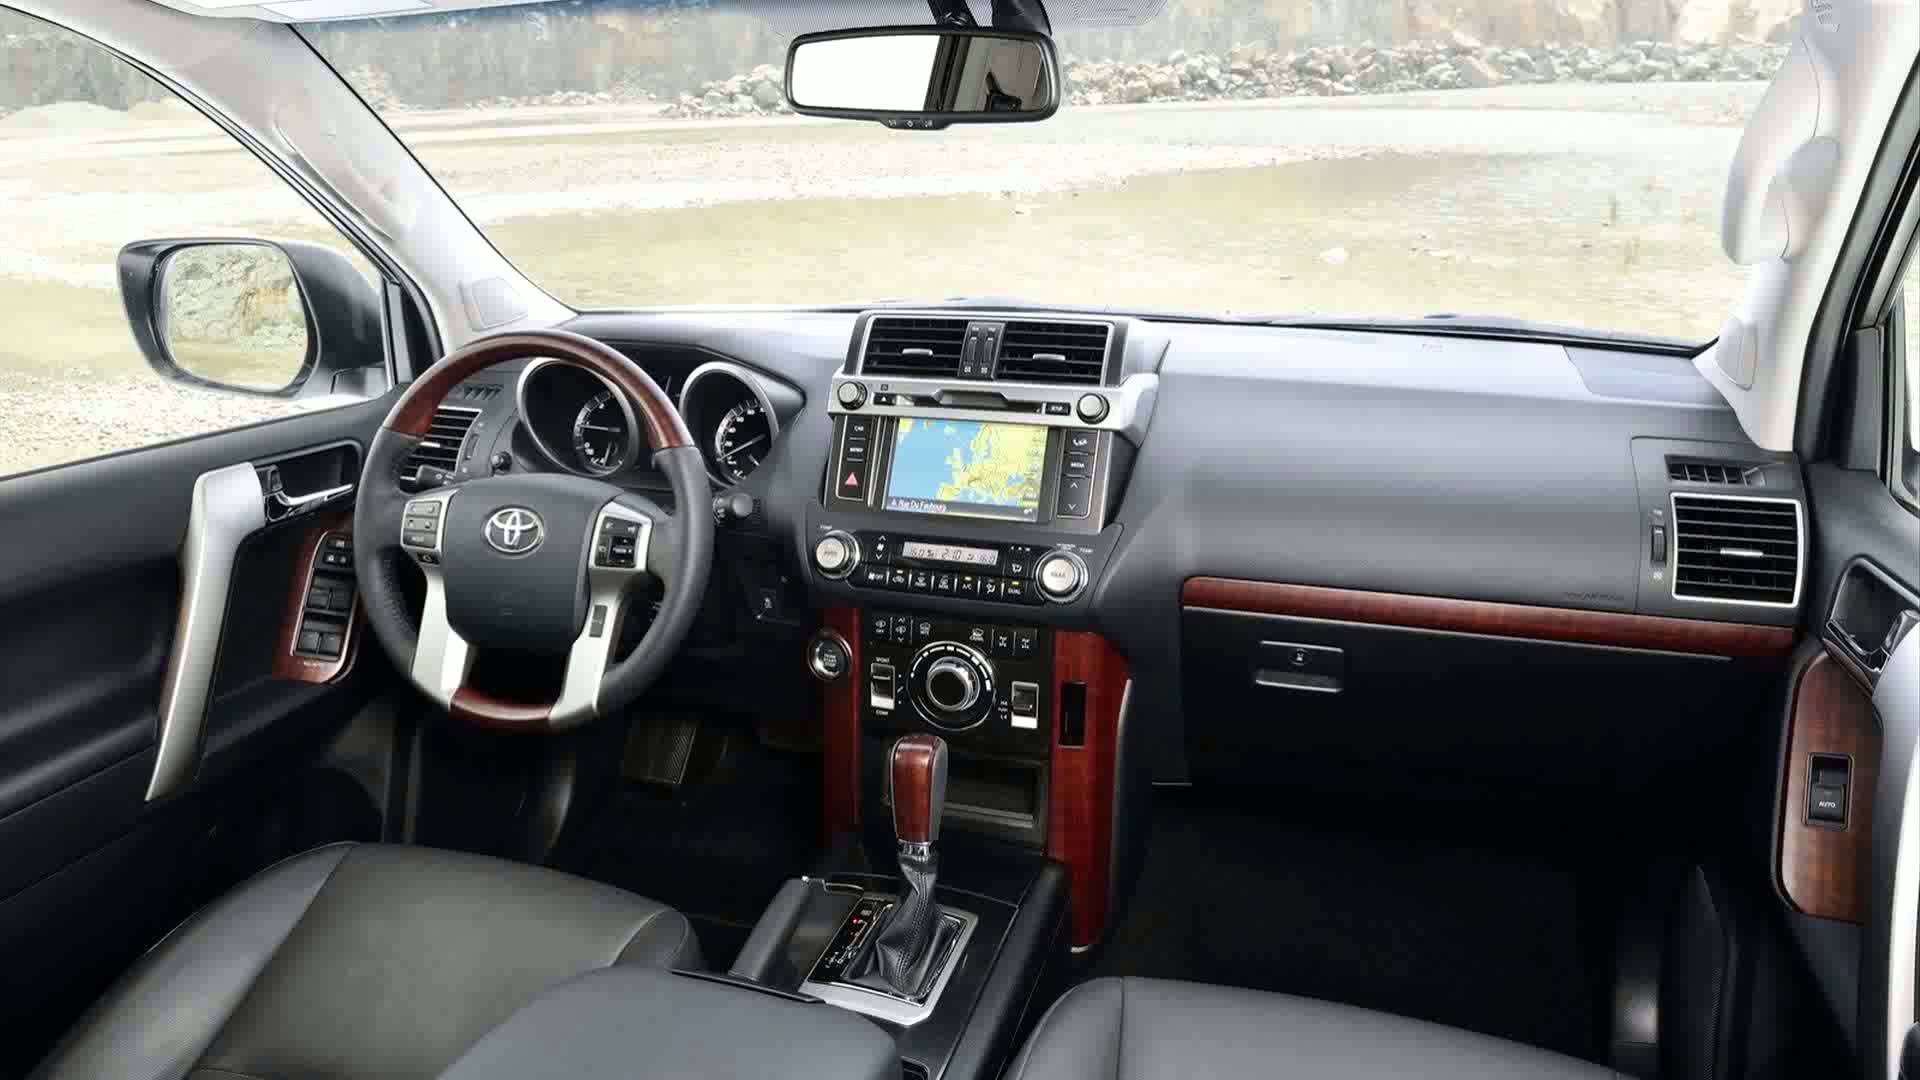 2014 Toyota Land Cruiser Pics, Vehicles Collection